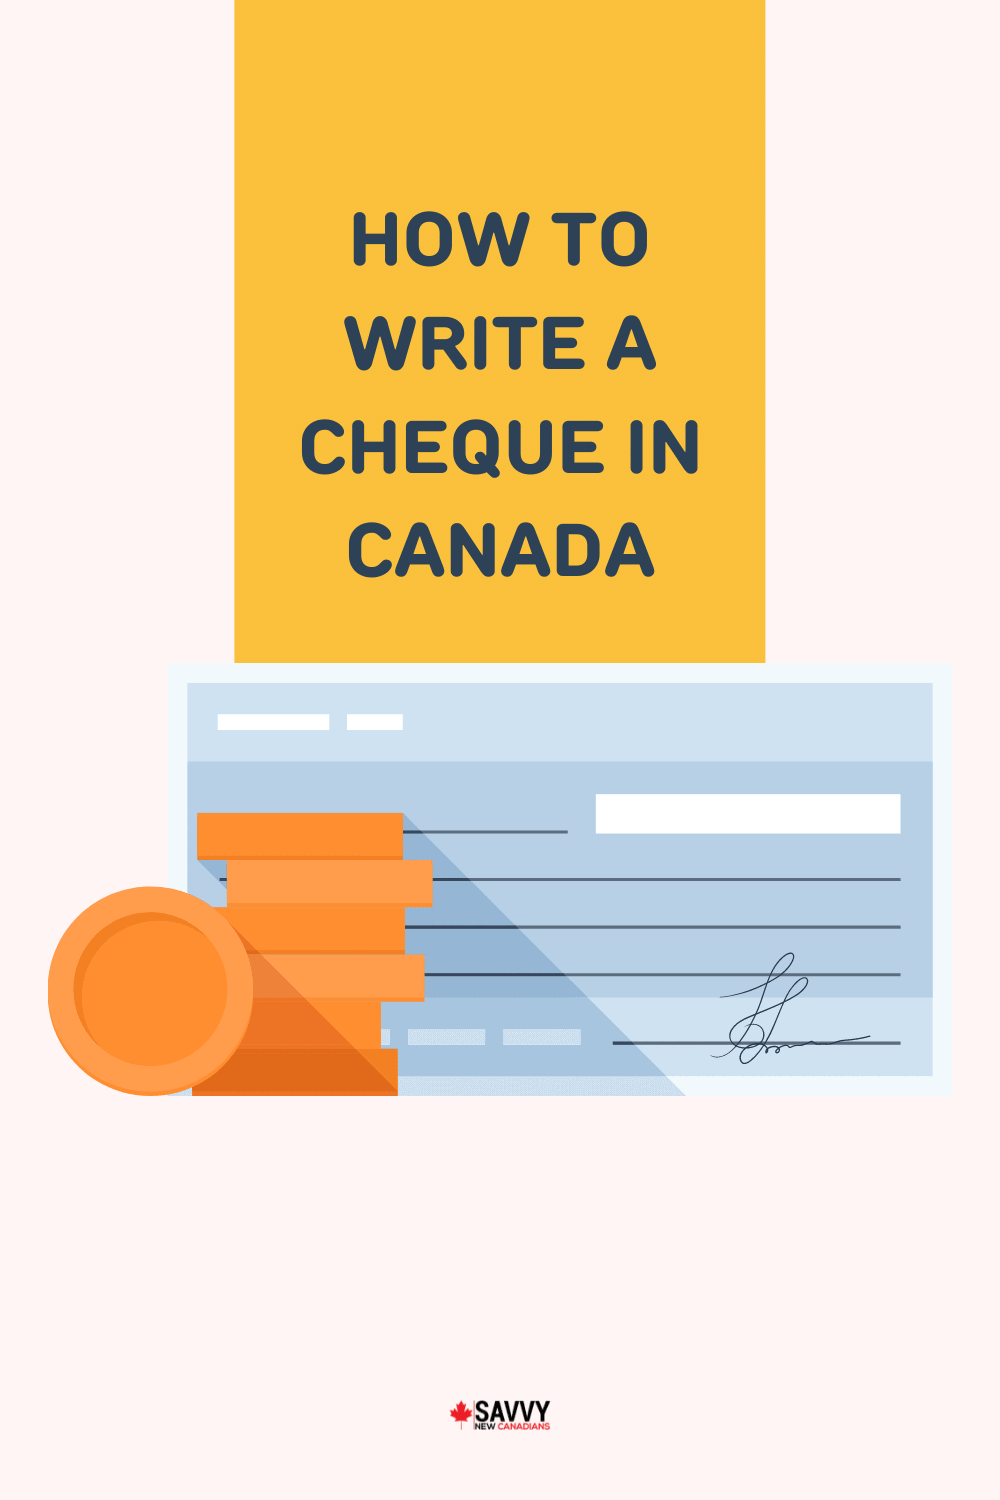 How To Write a Cheque in Canada: Step-by-Step Guide